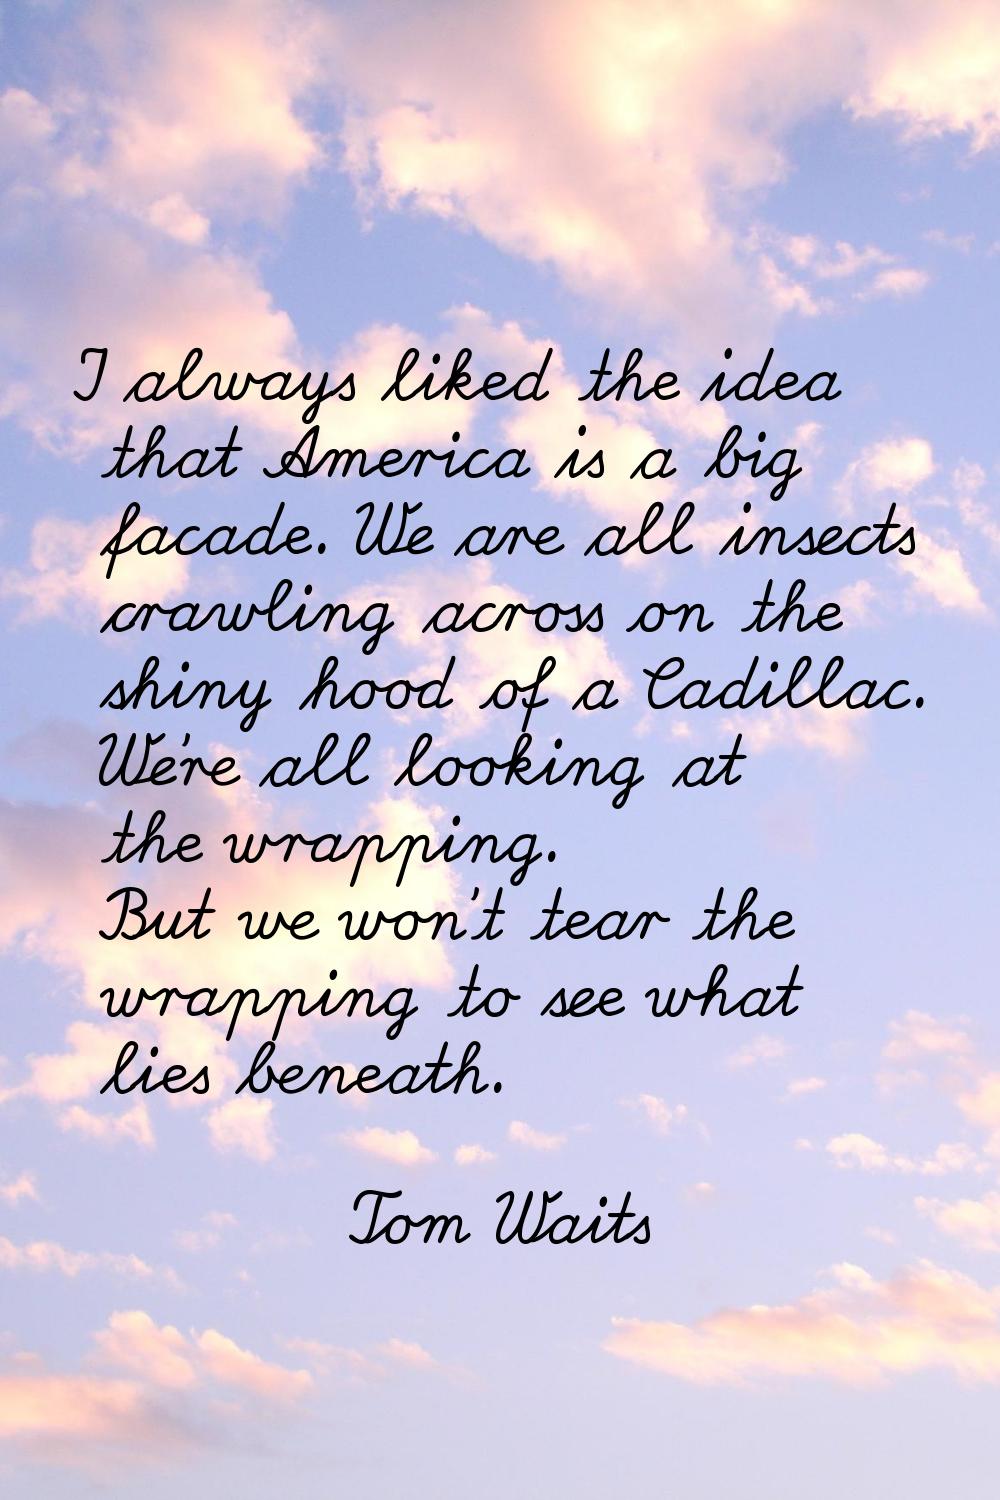 I always liked the idea that America is a big facade. We are all insects crawling across on the shi